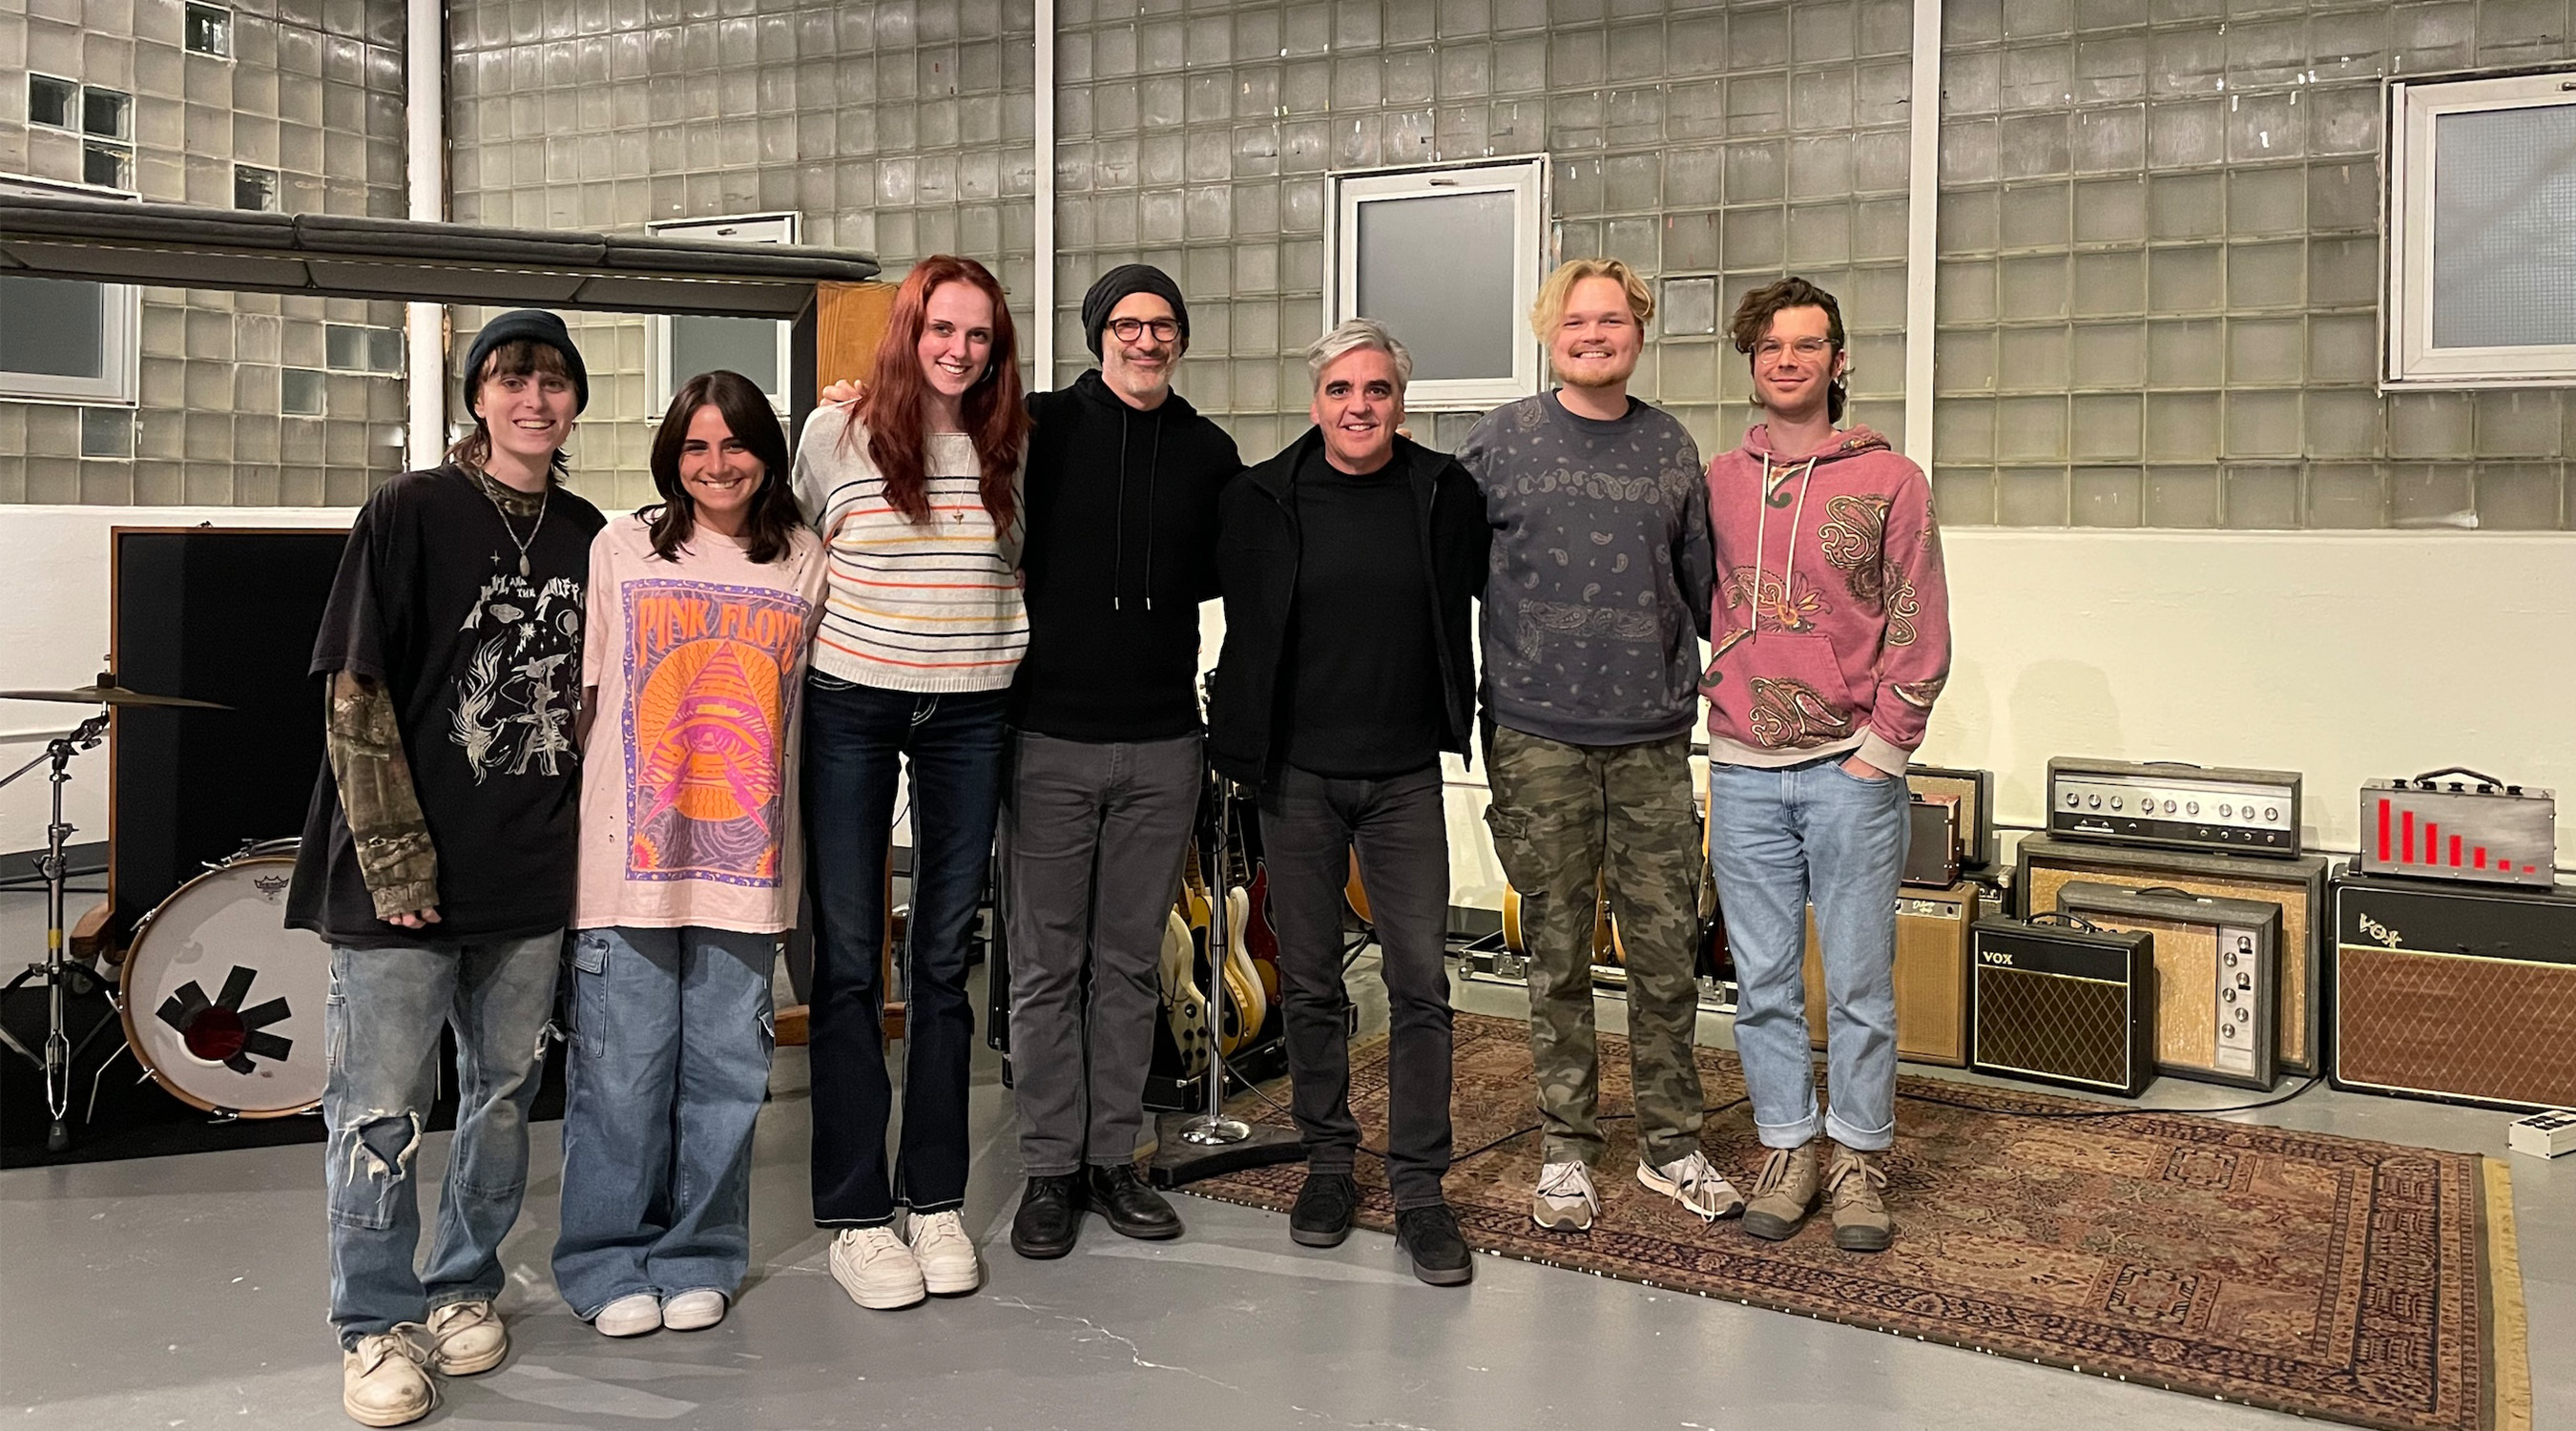 A group of students pose for a photo in a large music studio